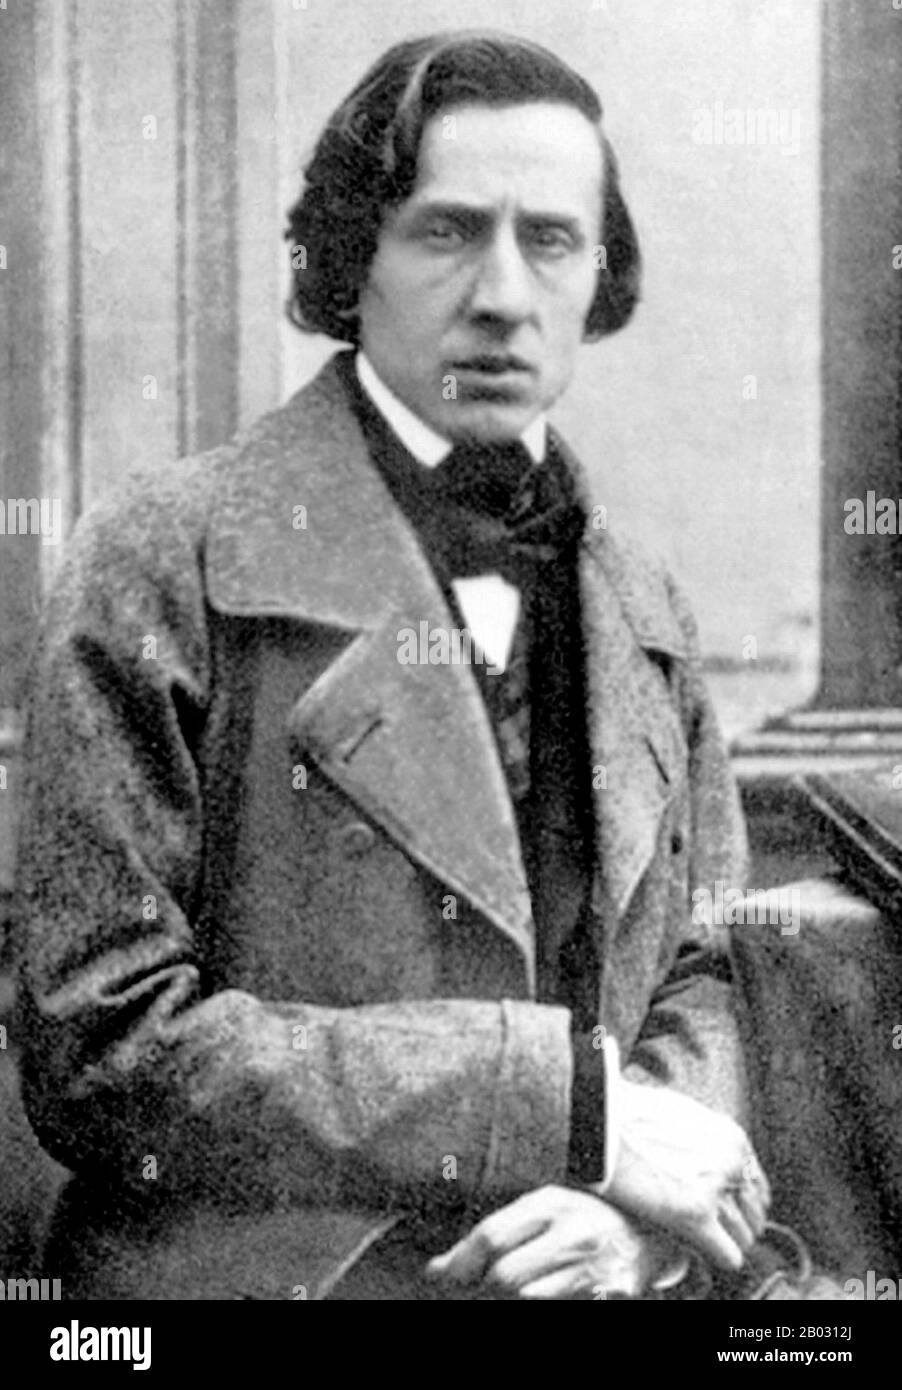 Frederic Francois Chopin (22 February or 1 March 1810 – 17 October 1849), born Fryderyk Franciszek Chopin, was a Polish composer and virtuoso pianist of the Romantic era, who wrote primarily for the solo piano.  He gained and has maintained renown worldwide as one of the leading musicians of his era. Stock Photo